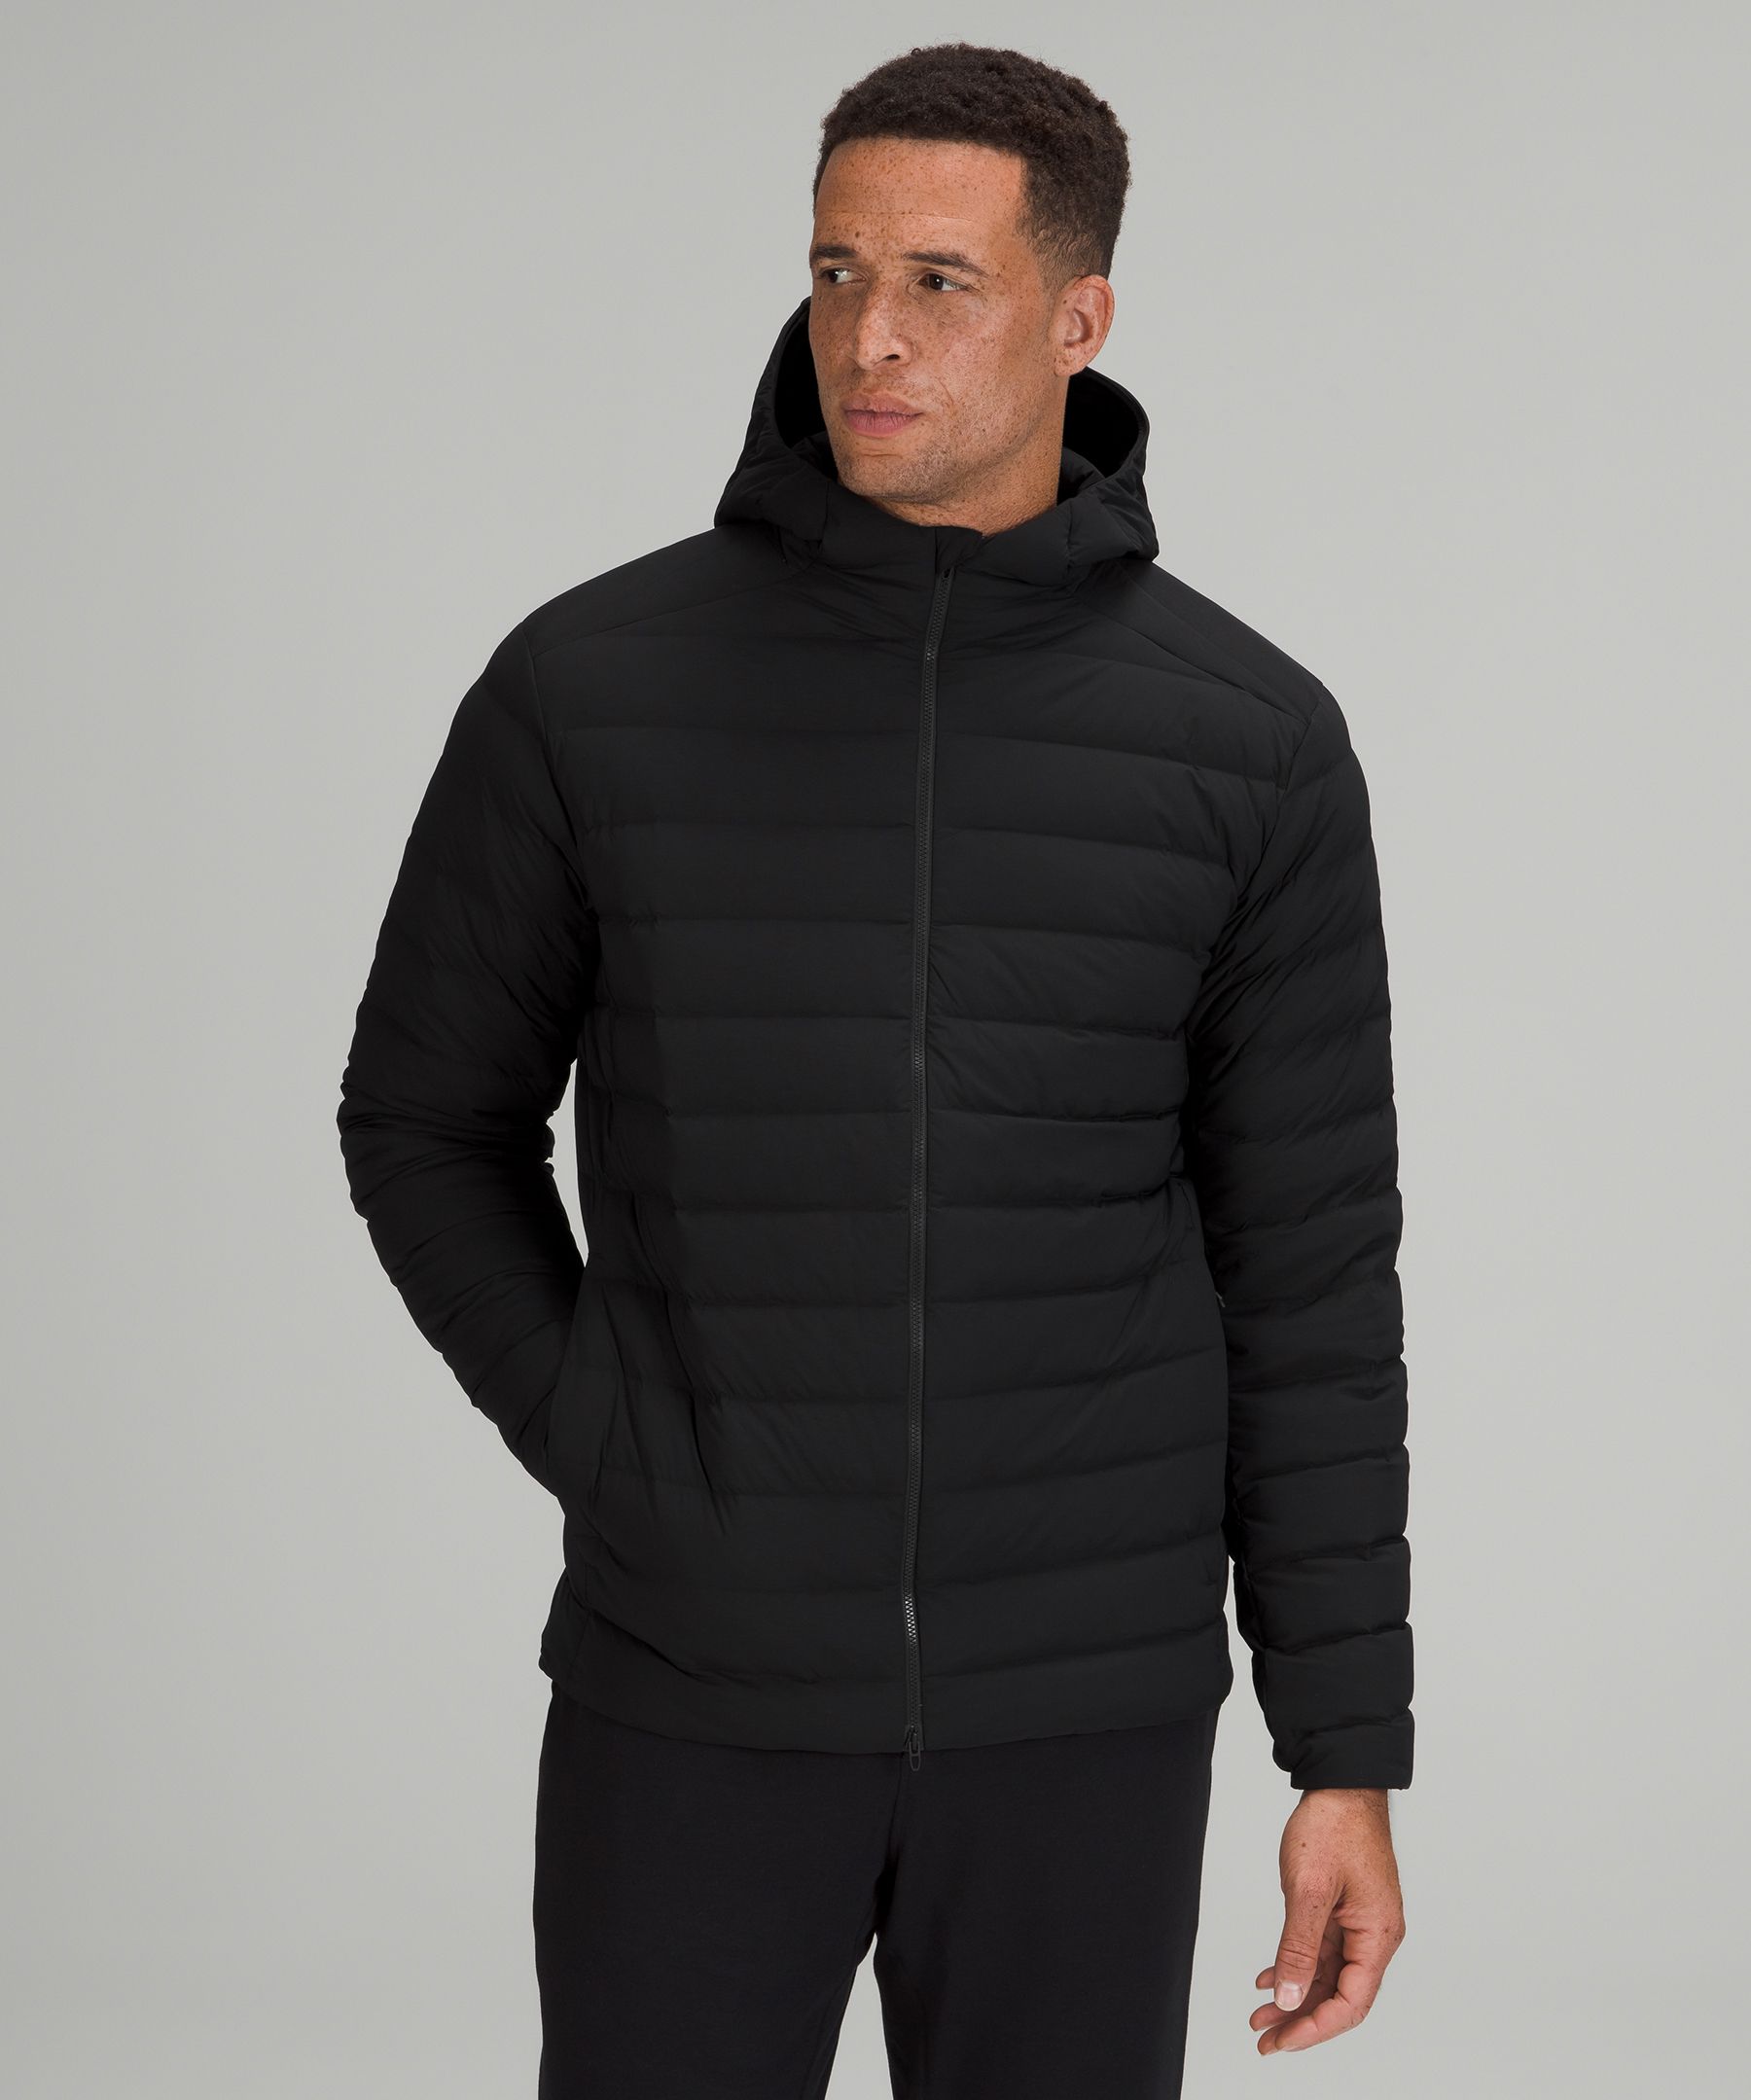 Lululemon Puffer Jacket Is at Its Lowest Price